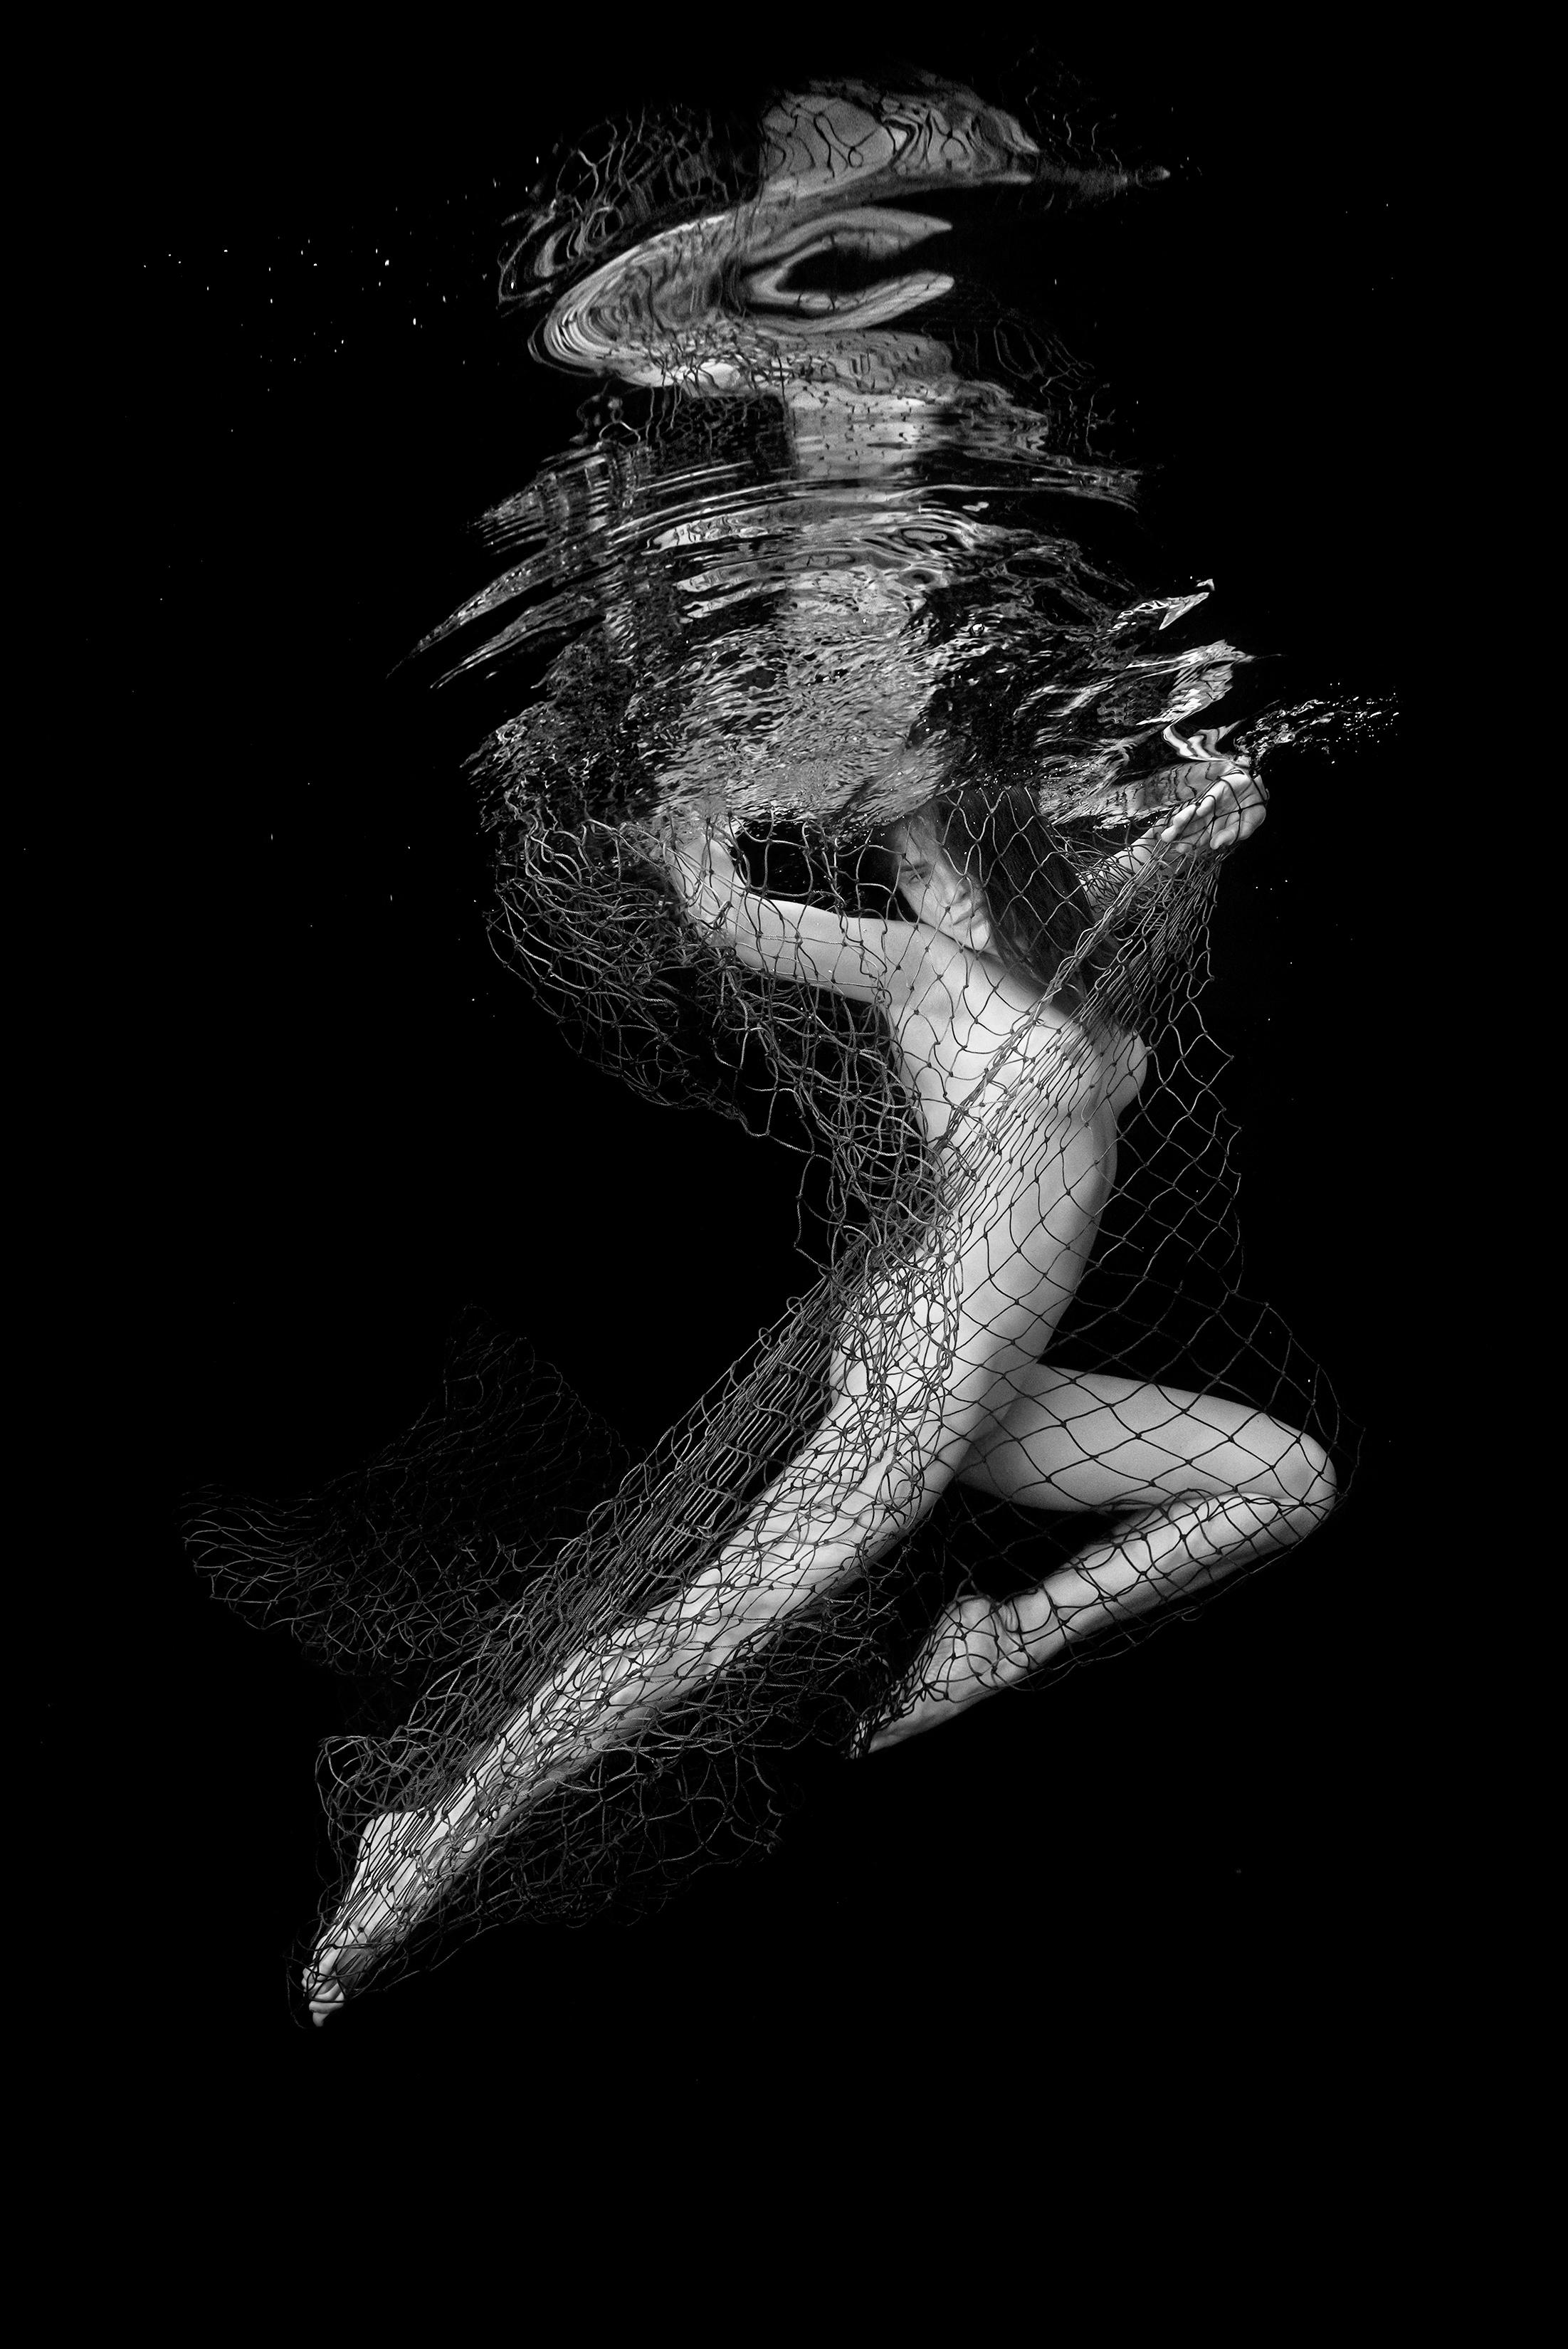 Alex Sher - Miraculous Catch - underwater black and white nude photograph